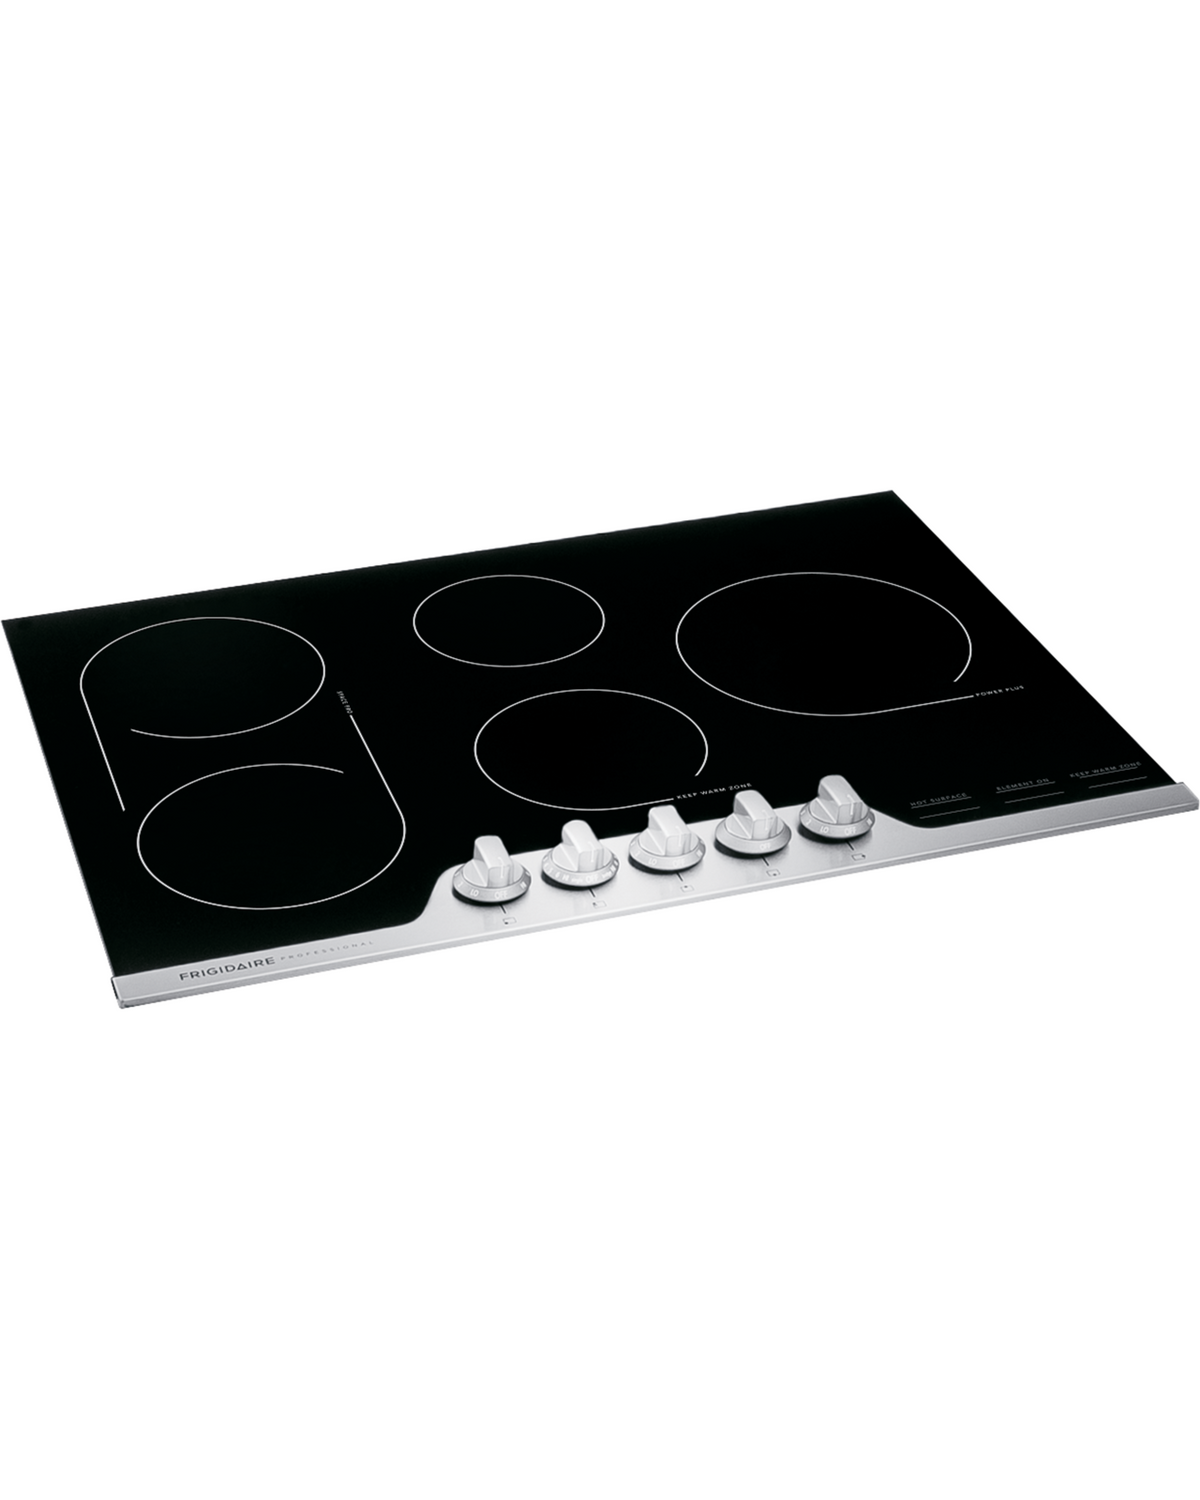 FRIGIDAIRE Professional FPEC3077RF  30&#39;&#39; Electric Cooktop - Stainless Steel/Black